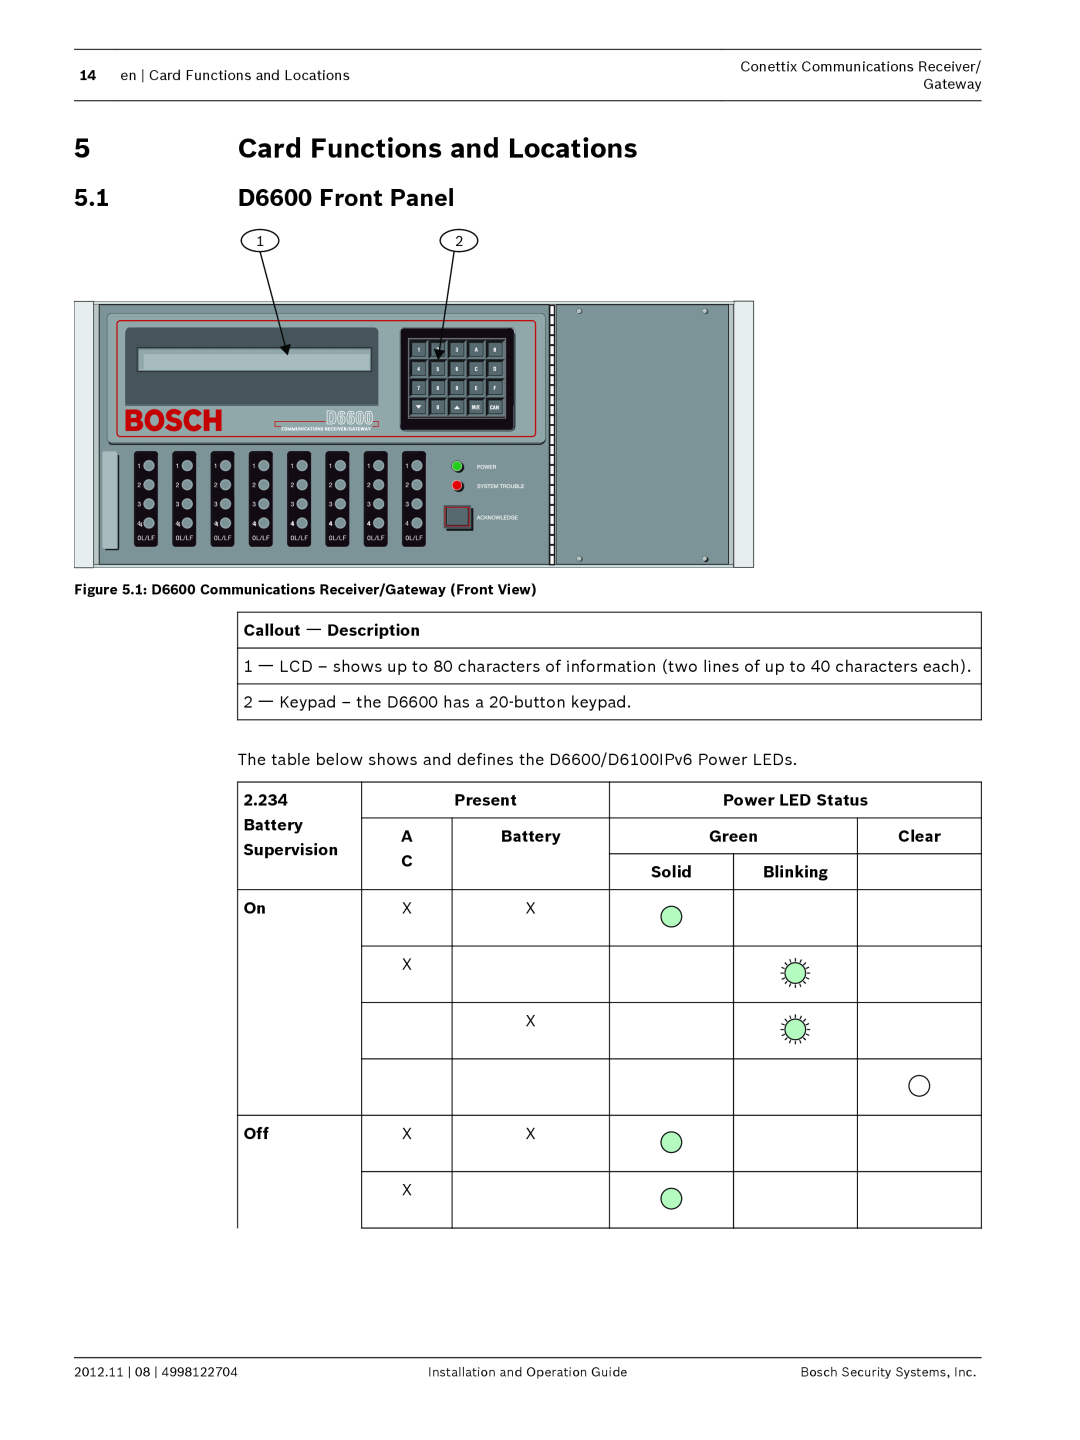 Bosch Appliances D6600 Card Functions and Locations, Callout ᅳ Description, 2.234, Present, Power LED Status, Battery 